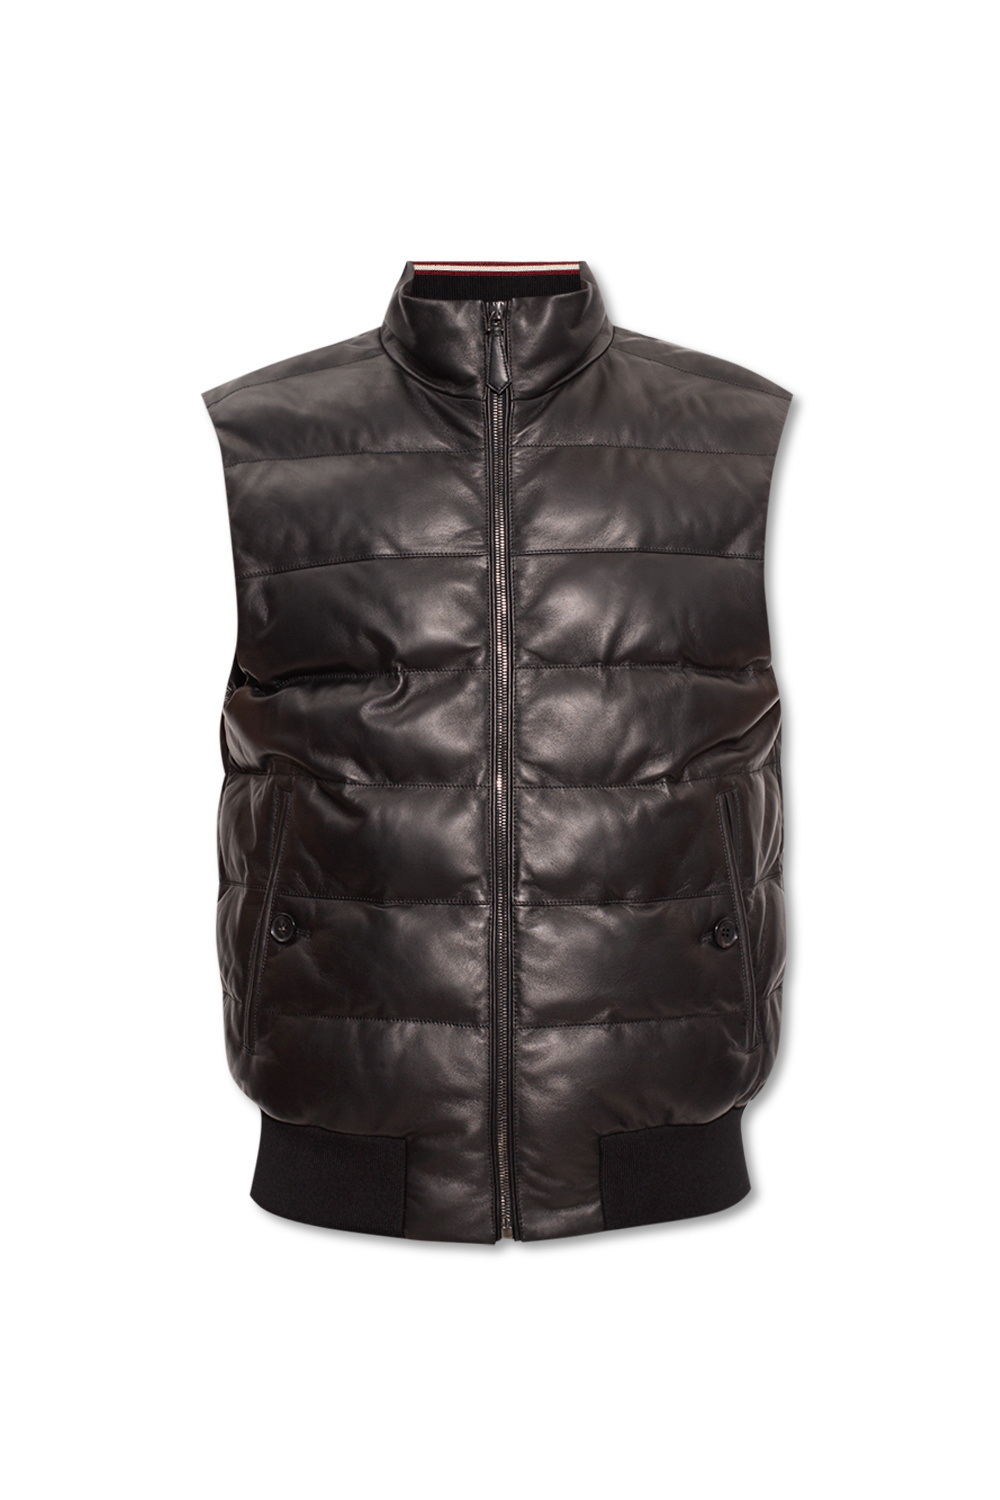 Bally Insulated leather jacket